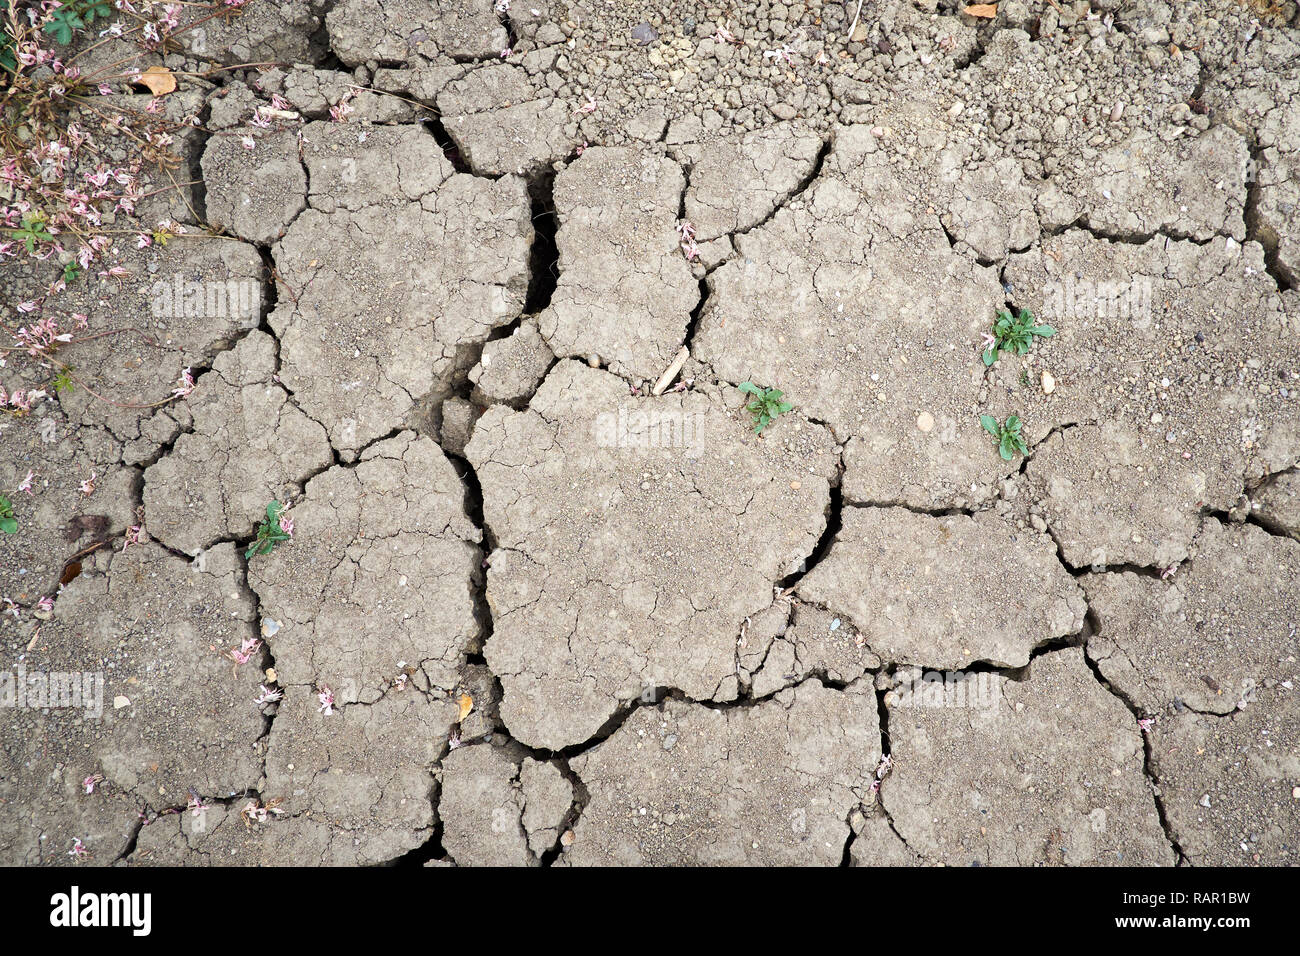 Parched, desiccated soil, a result of the unusually hot and dry summer weather experienced by the UK during June and July 2018. Stock Photo